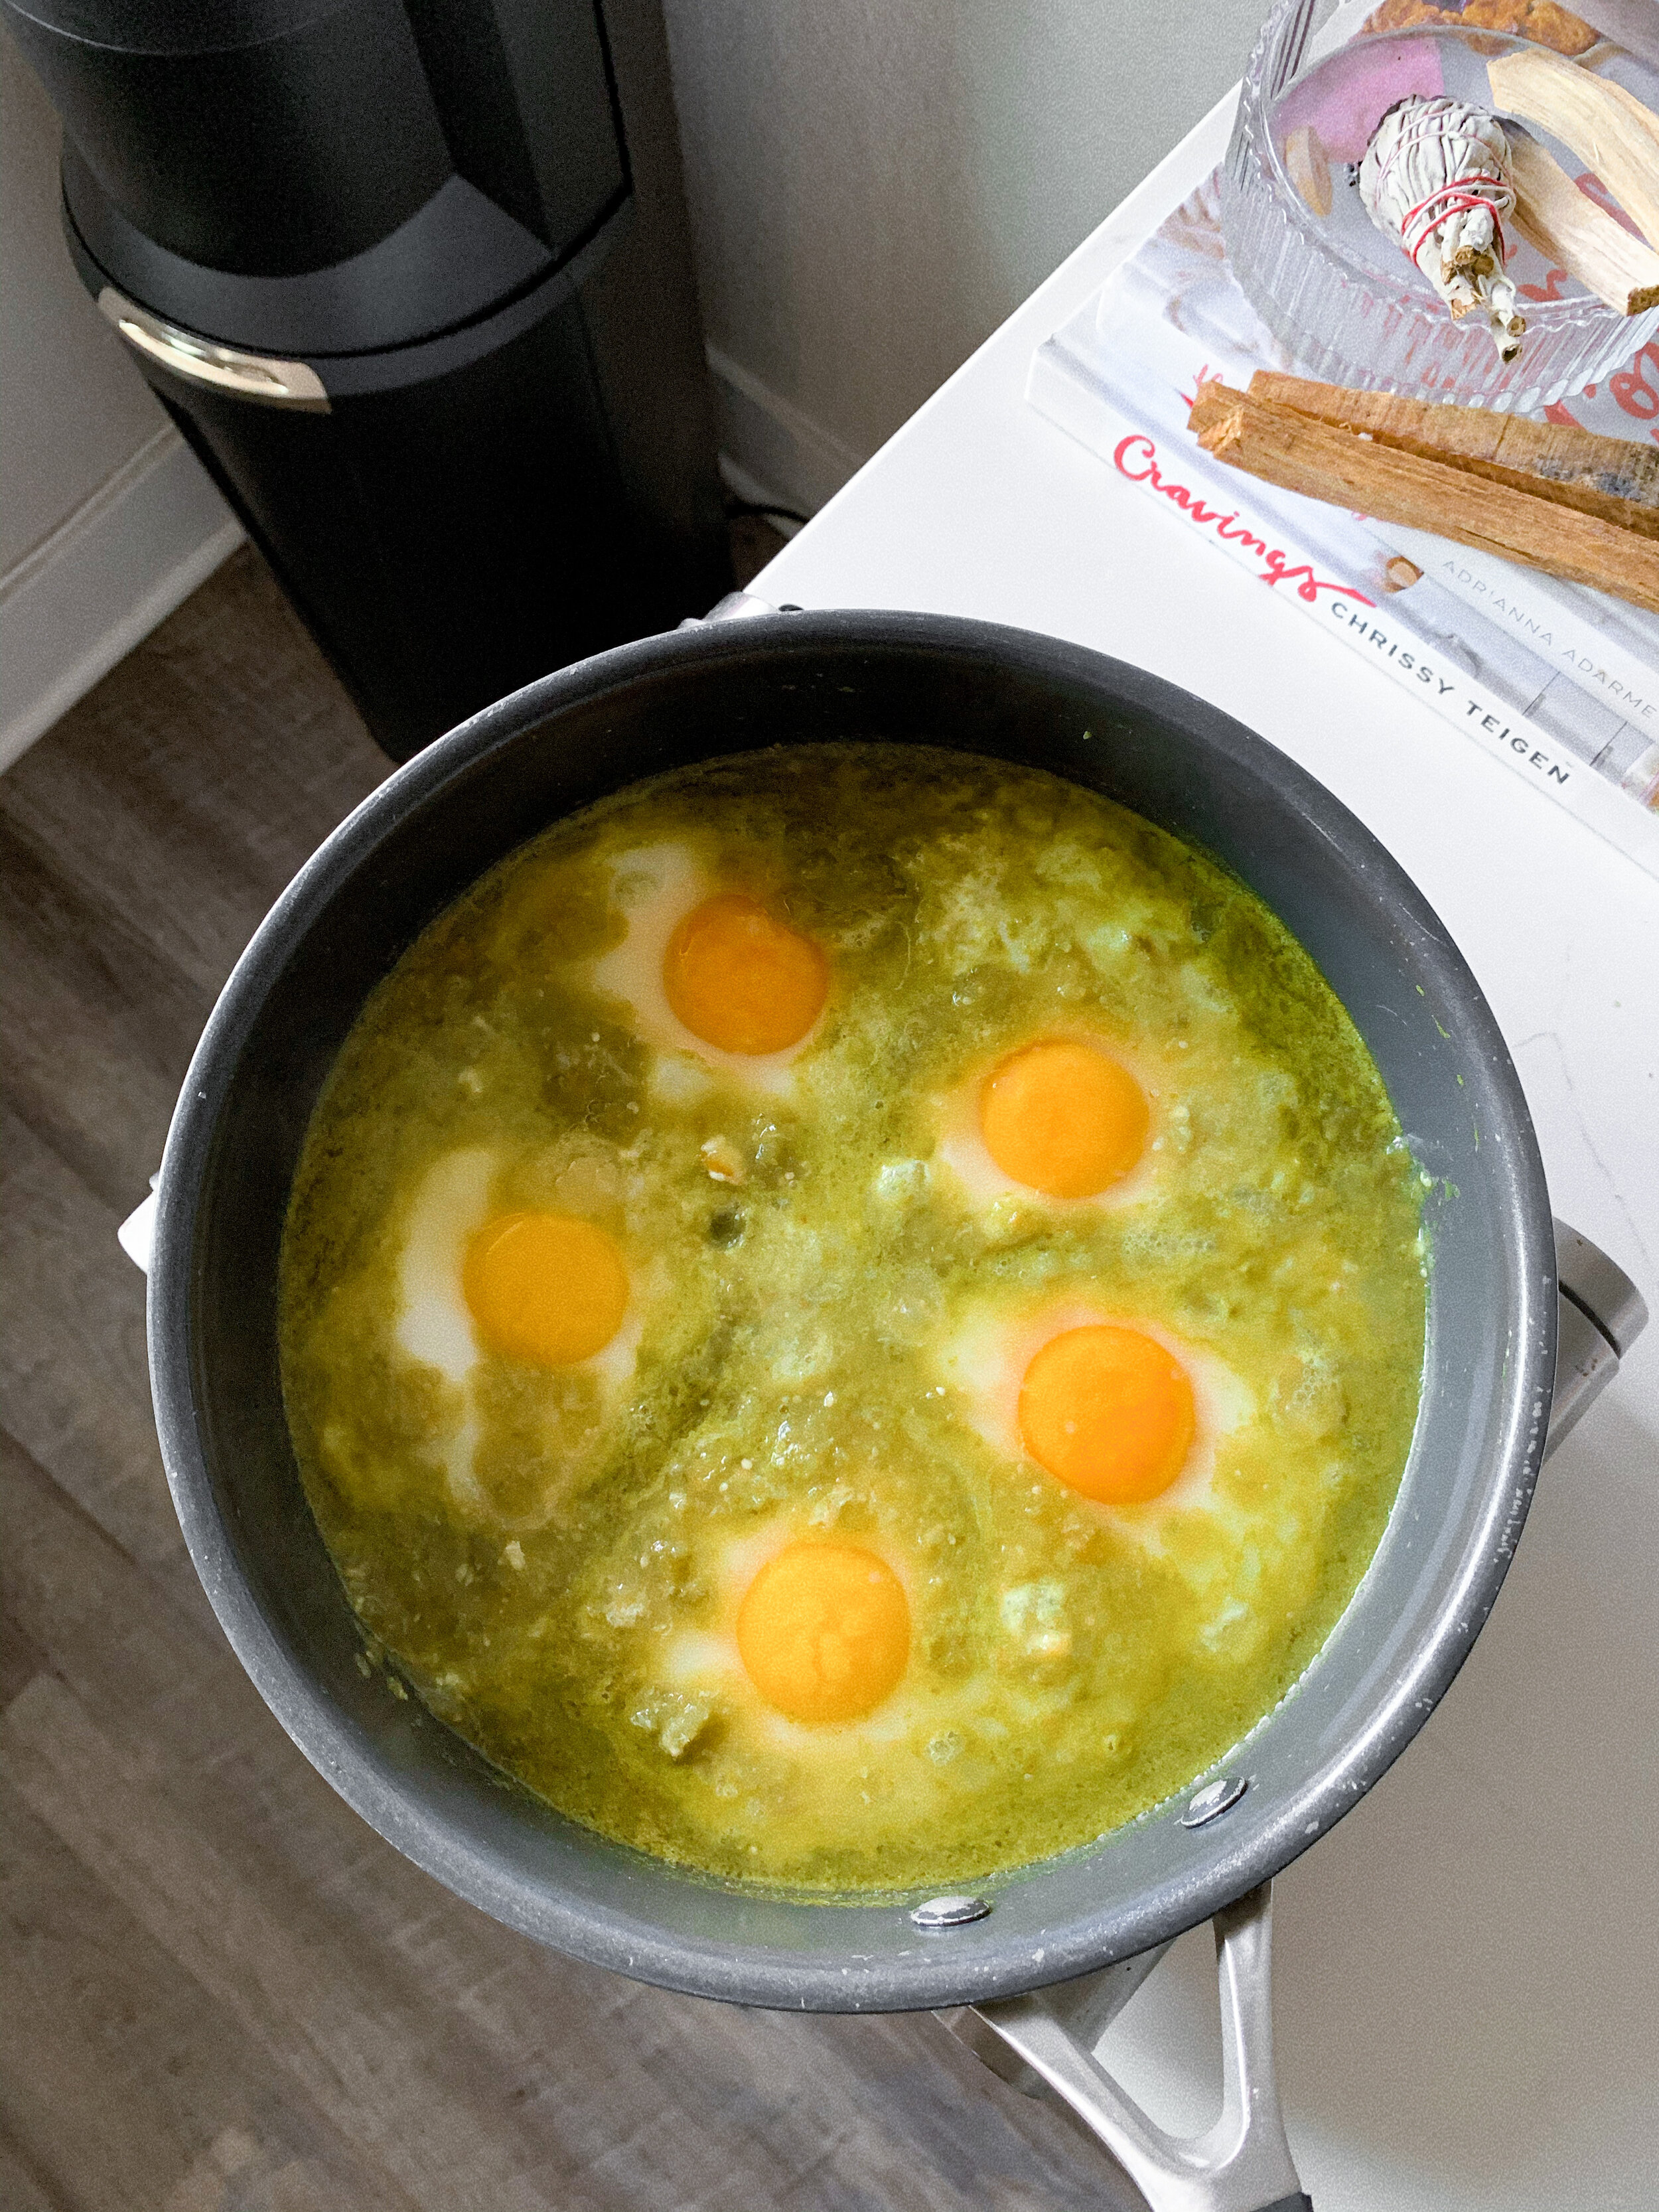 Poaching the eggs in the salsa verde until desired doneness